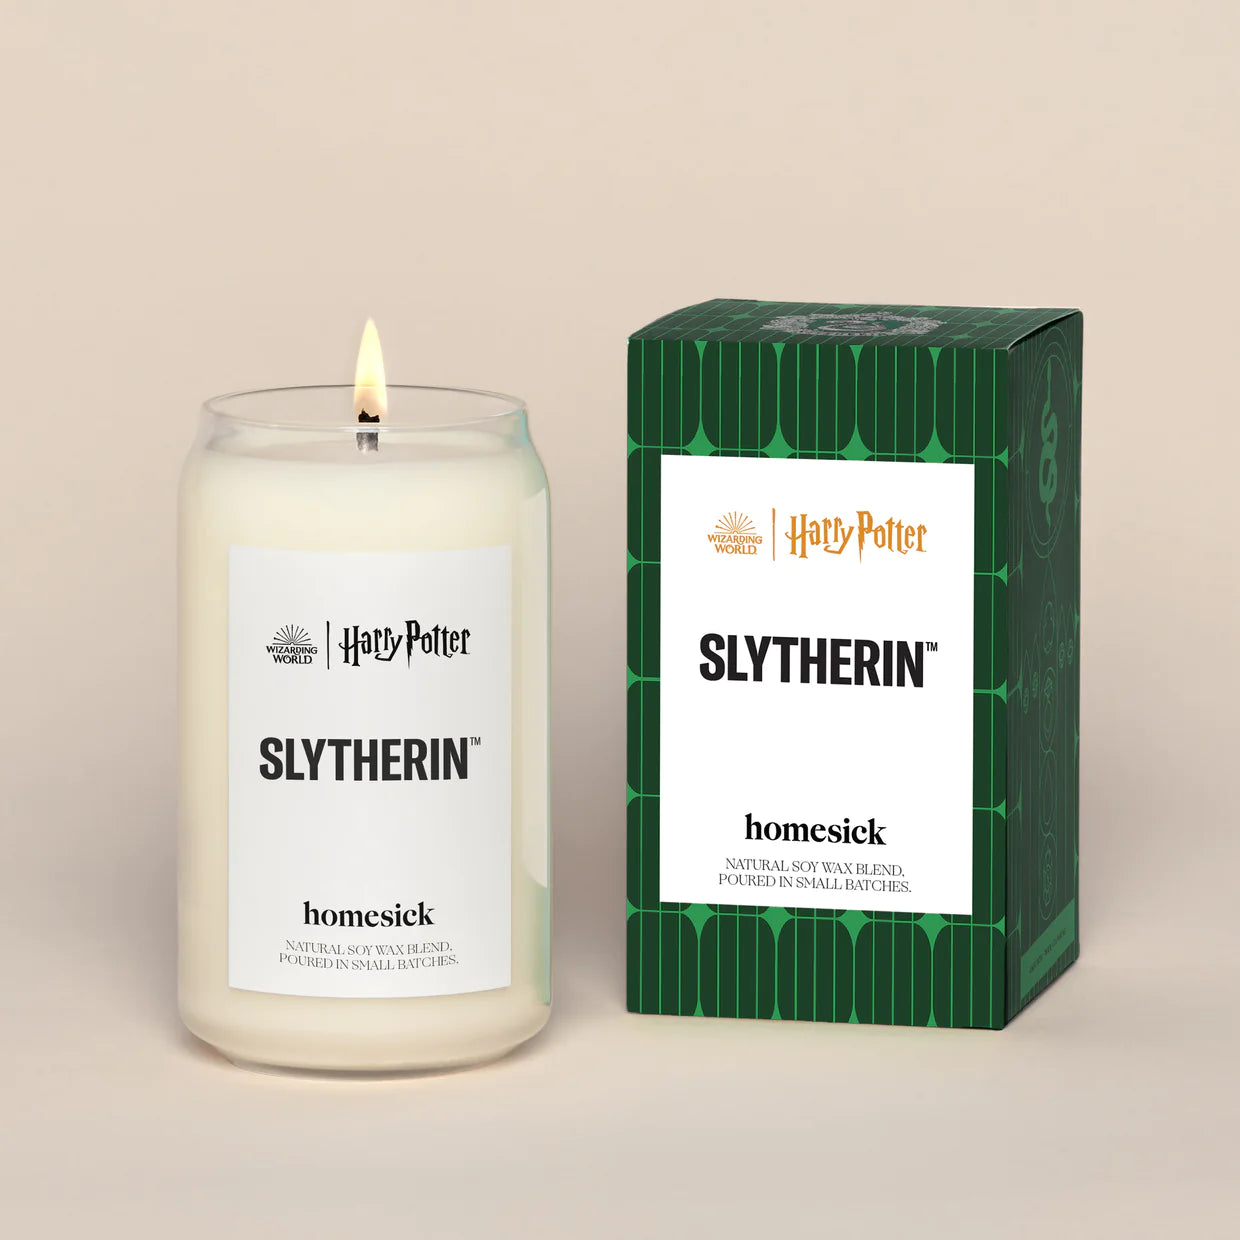 Homesick Harry Potter Slytherin Candle Dark Plum and Lake Water Scent 